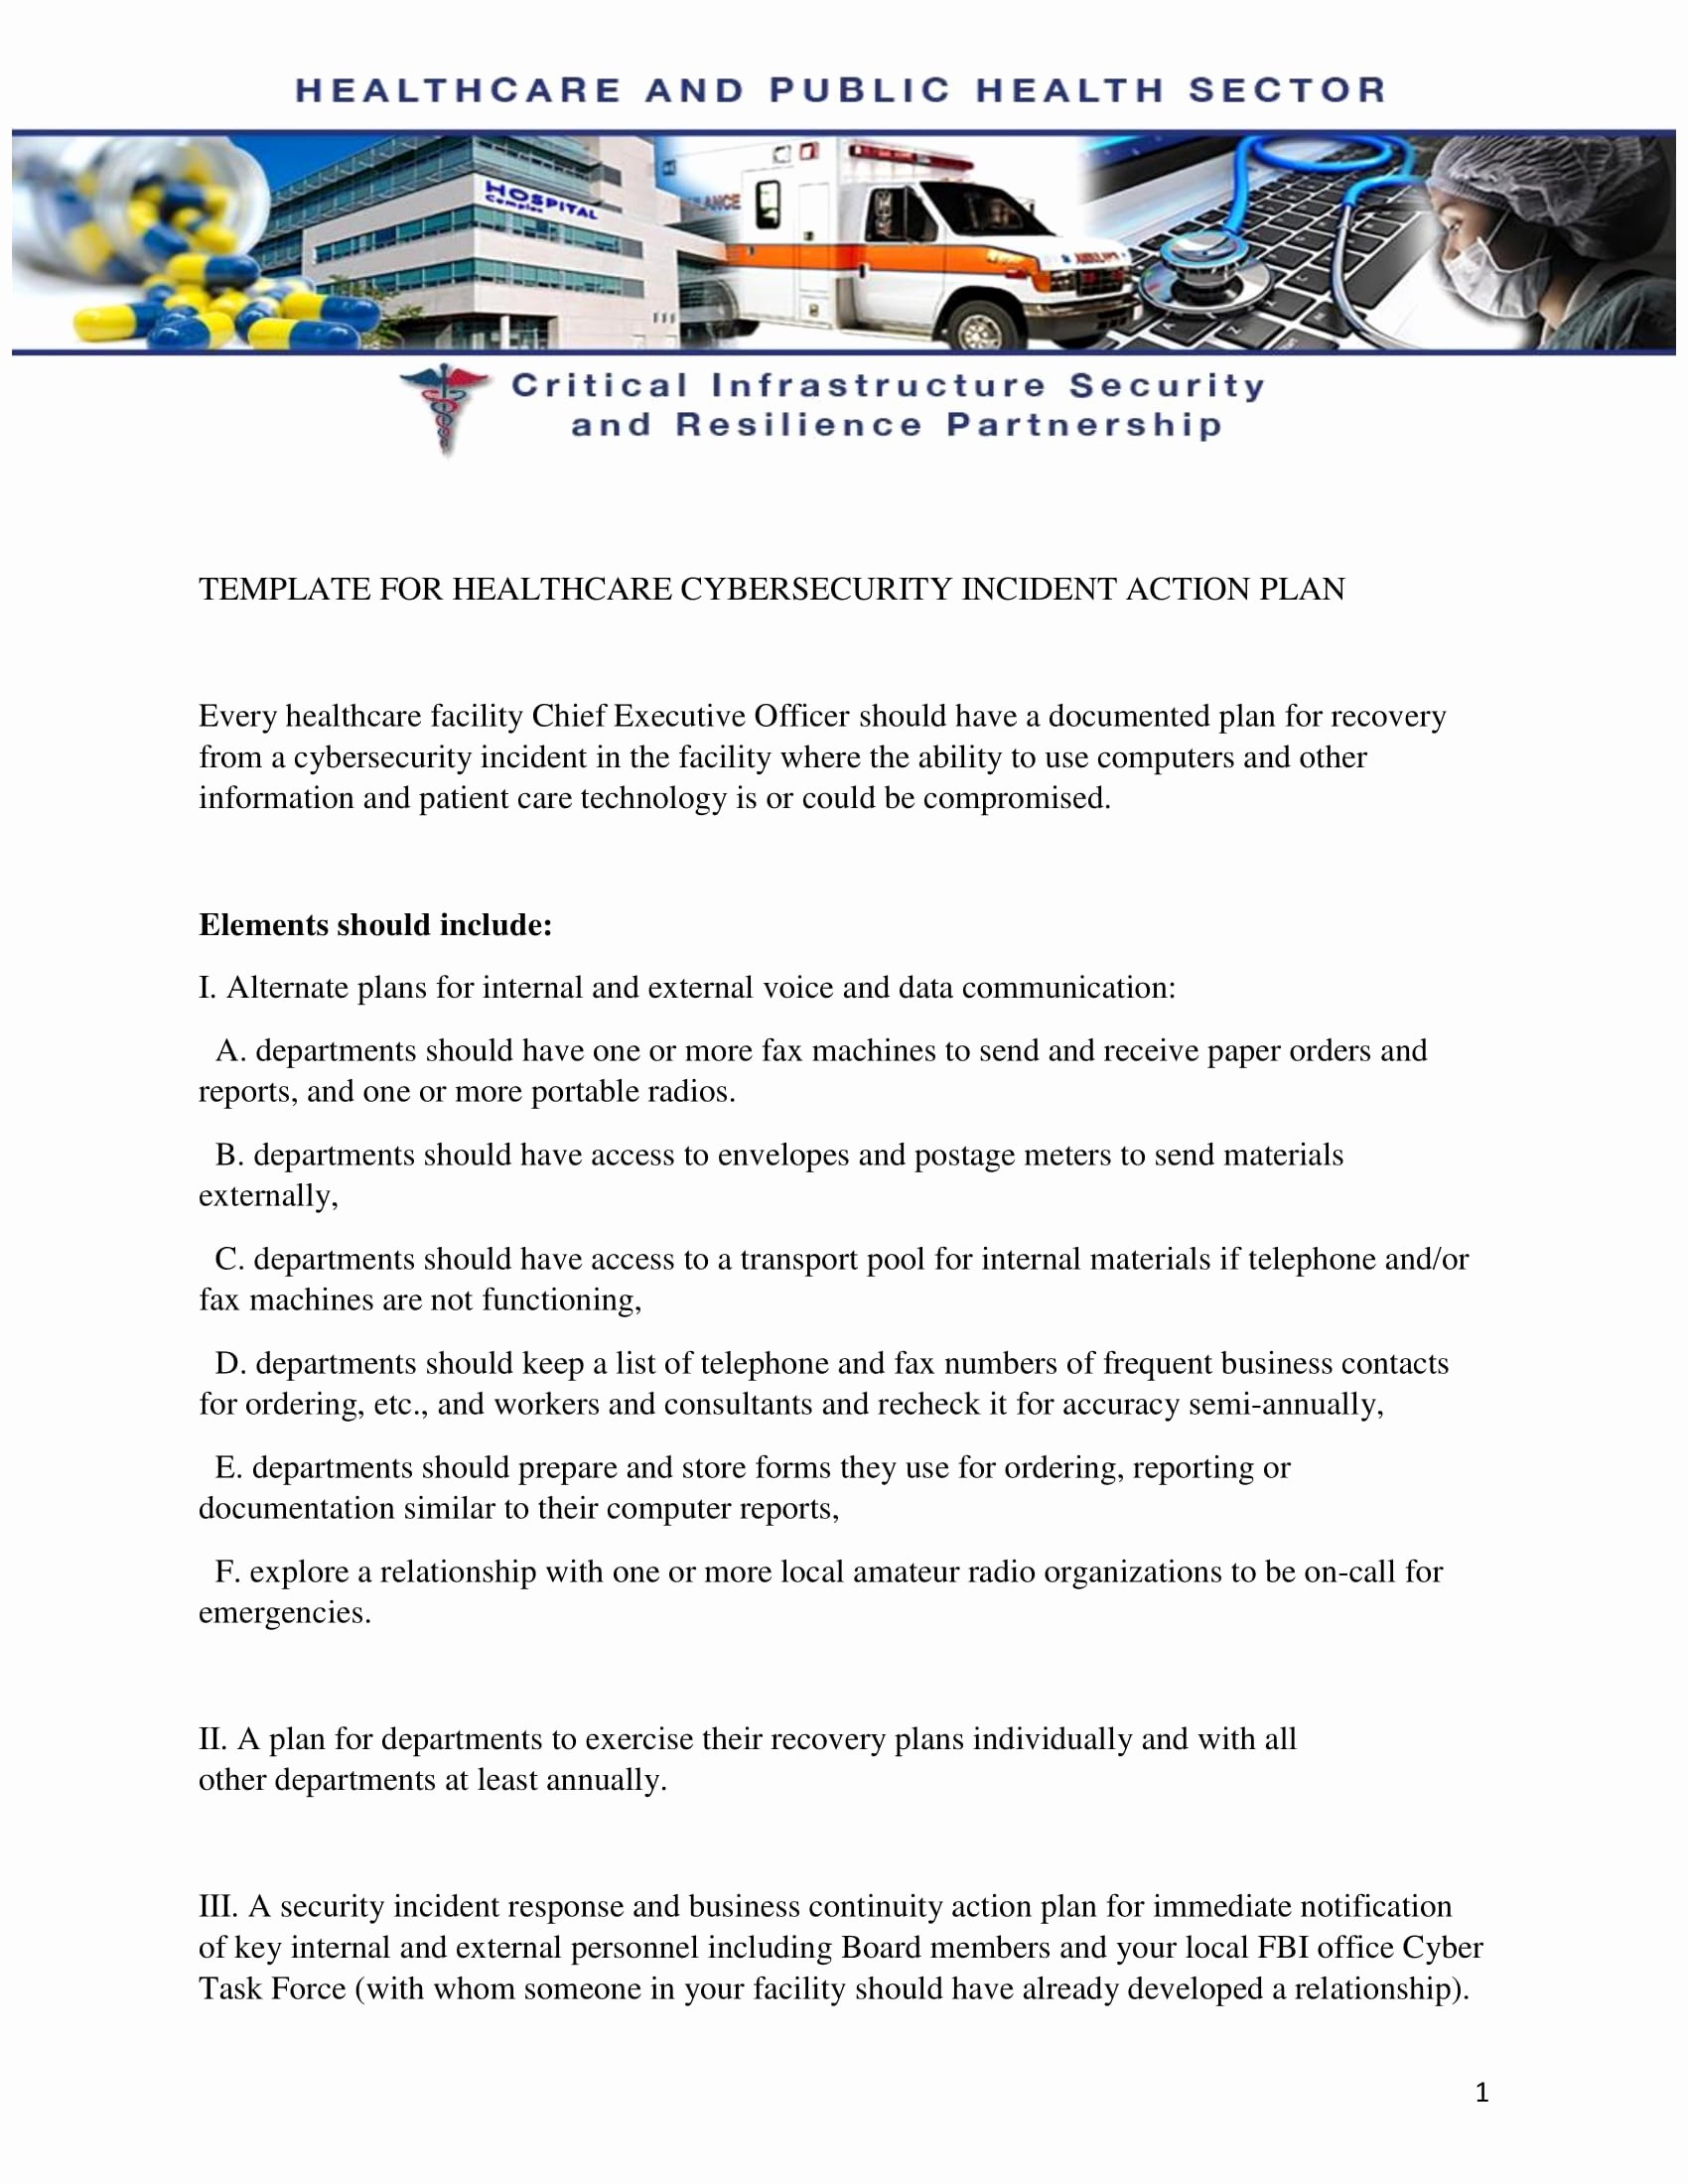 Incident Action Plan Example Best Of 10 Incident Action Plan Templates Pdf Word